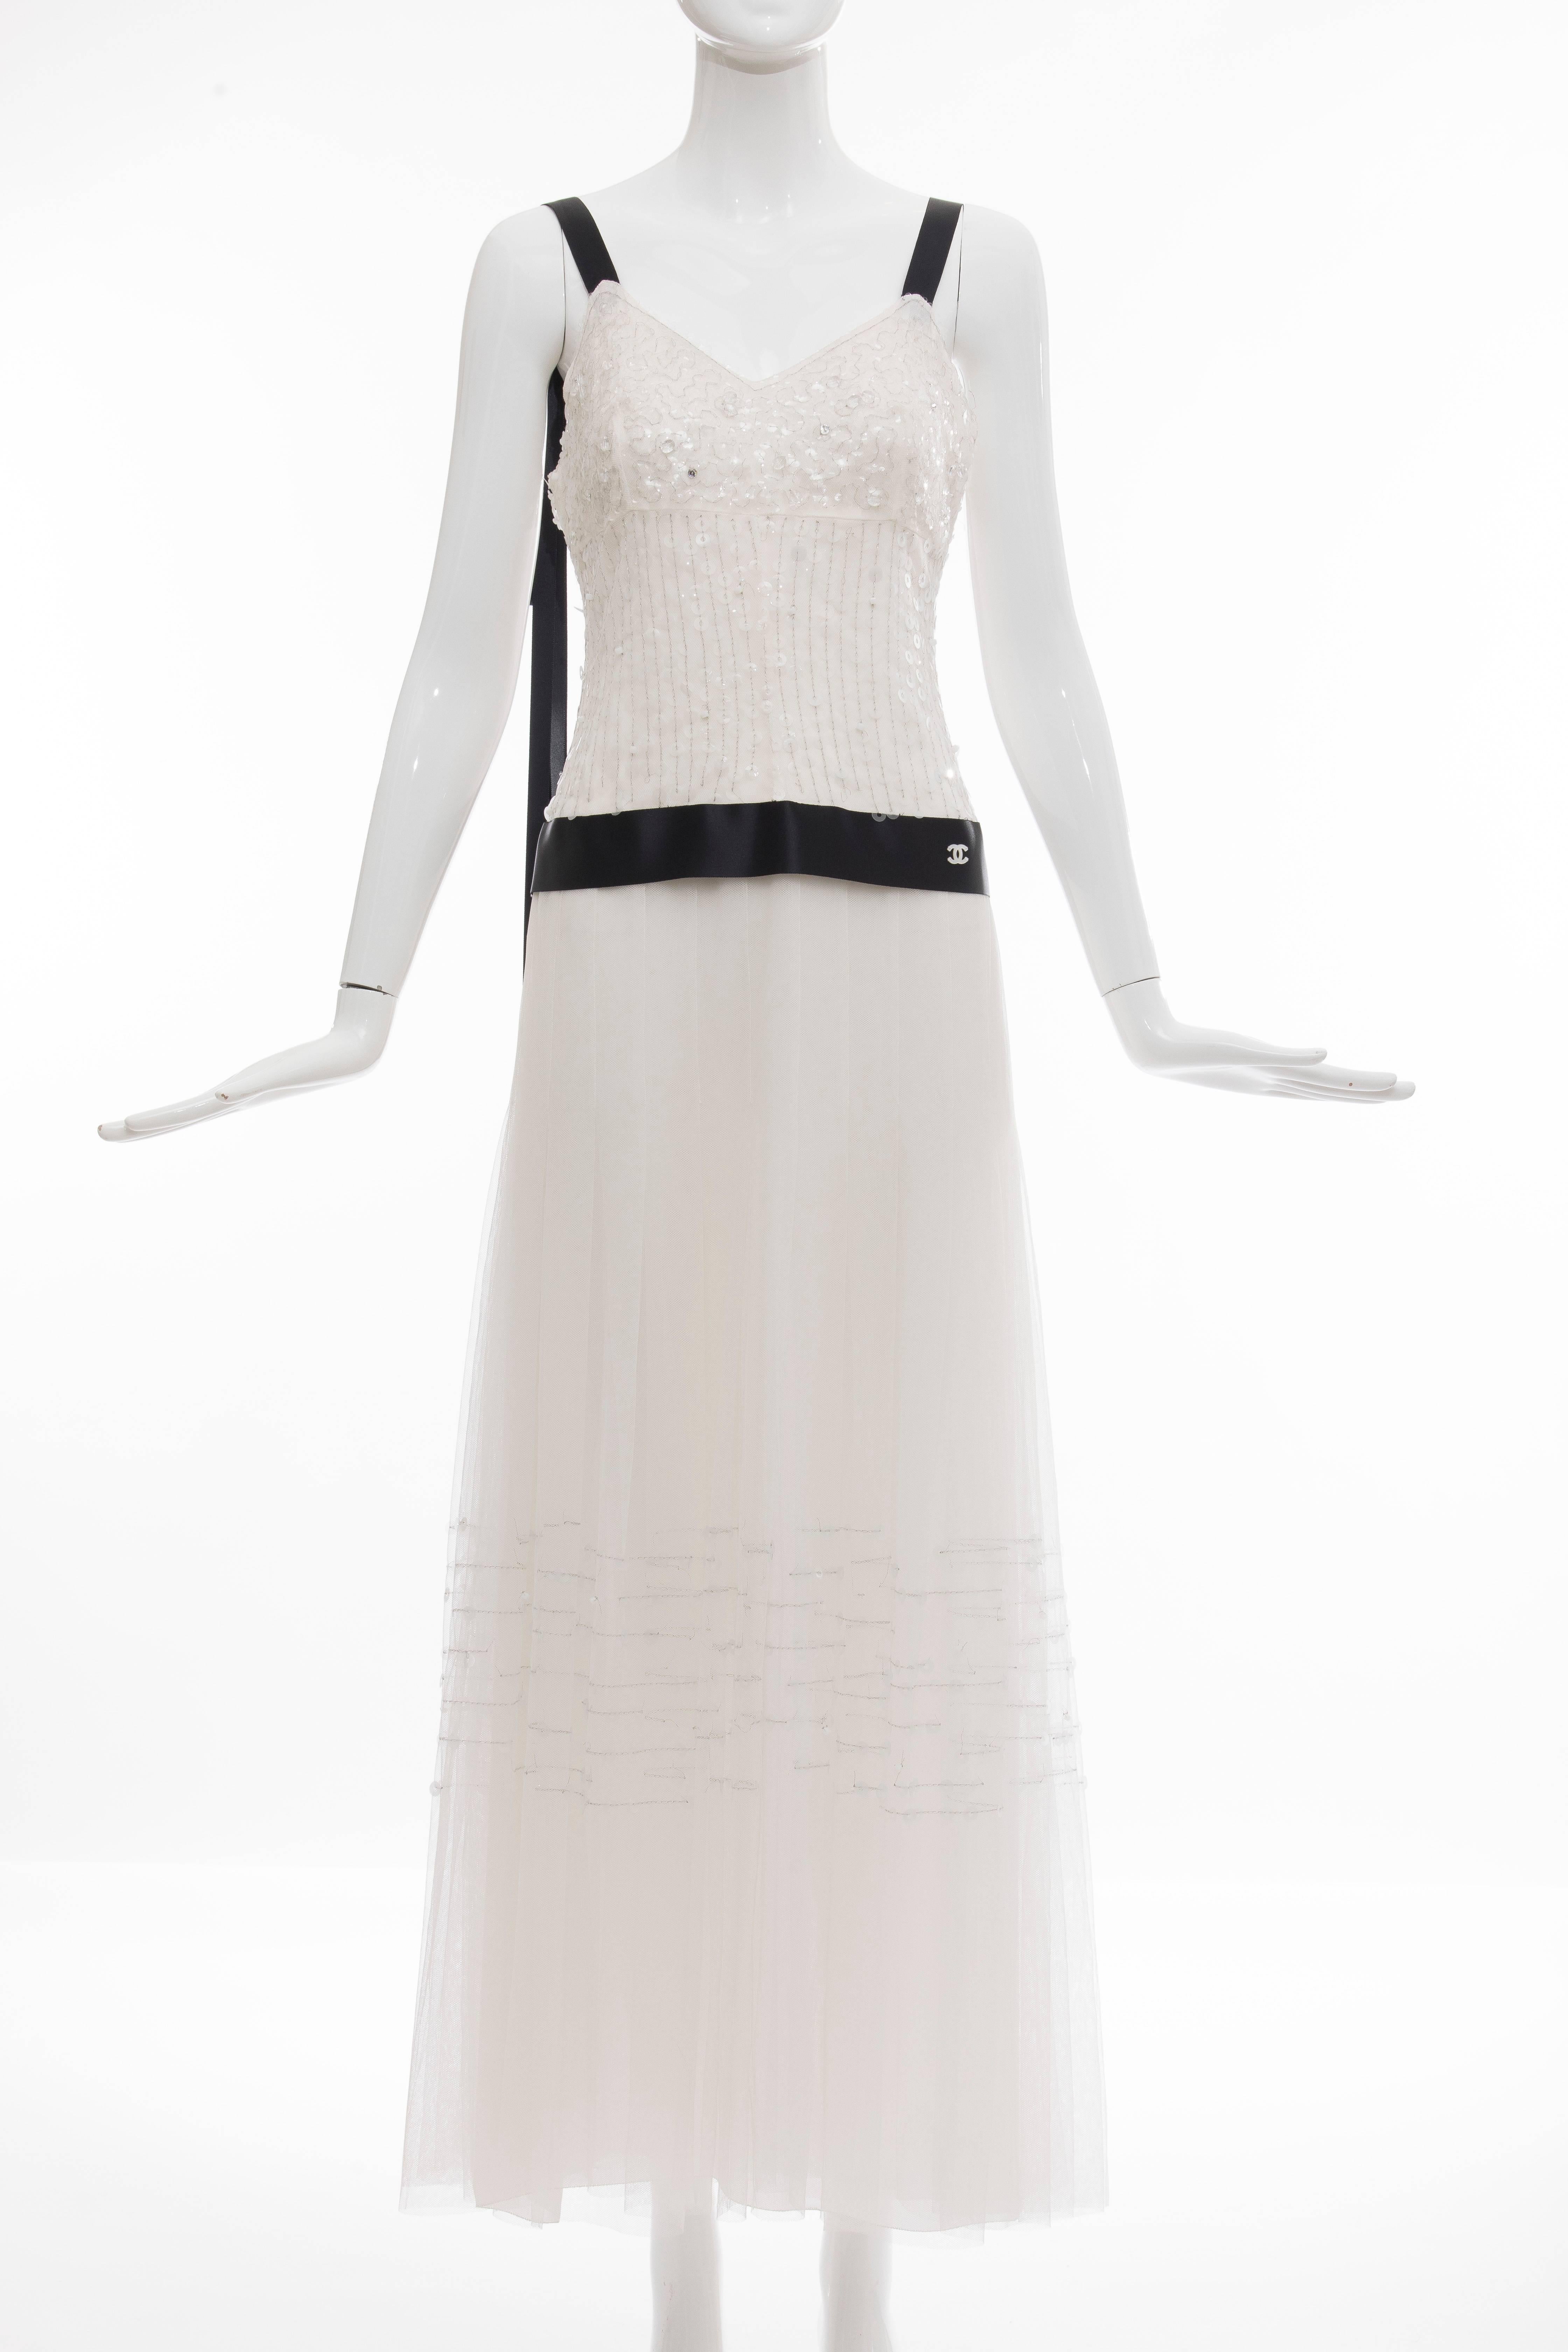 Chanel, Cruise 2005, white mesh evening dress with embellished white sequins and beaded, sweetheart neck, empire waist, detachable mesh shawl,detachable feather Camellia pin at bust, satin trim, box pleating at skirt and back pearl button closures.